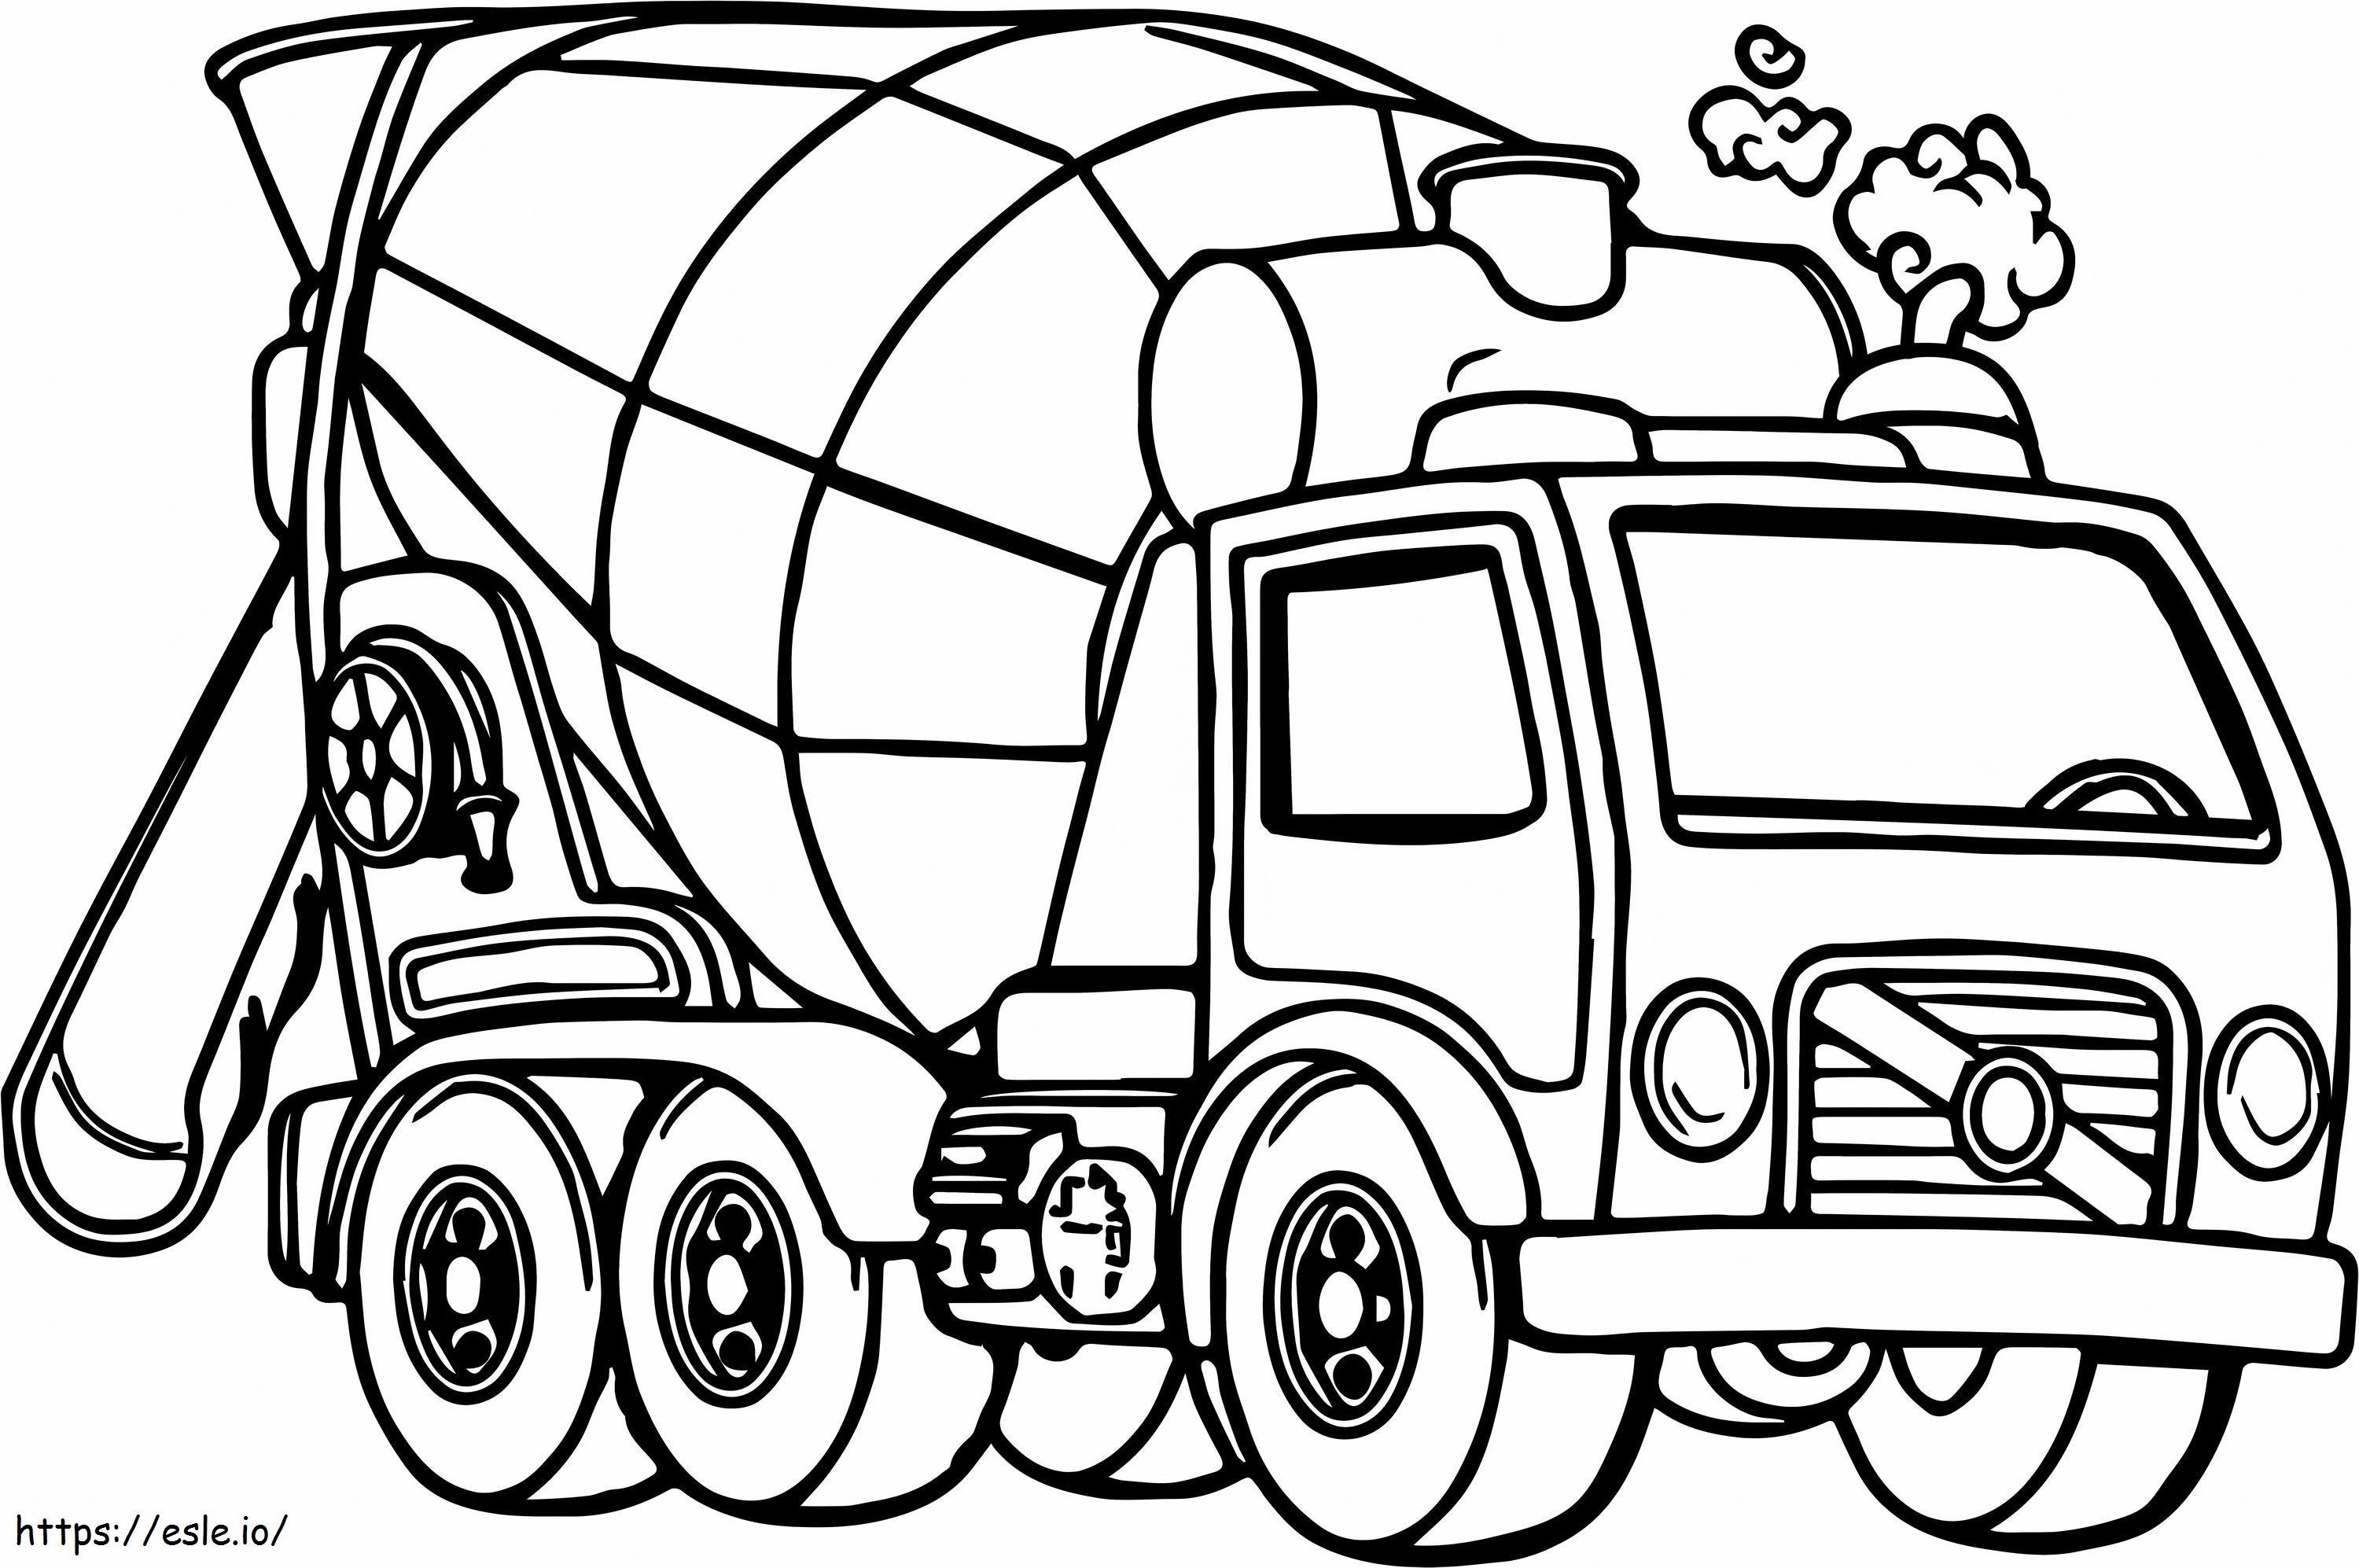 1543543841 Cement Mixer Truck 3 R Adult Concrete Truck 18 I Good Cement Truck coloring page